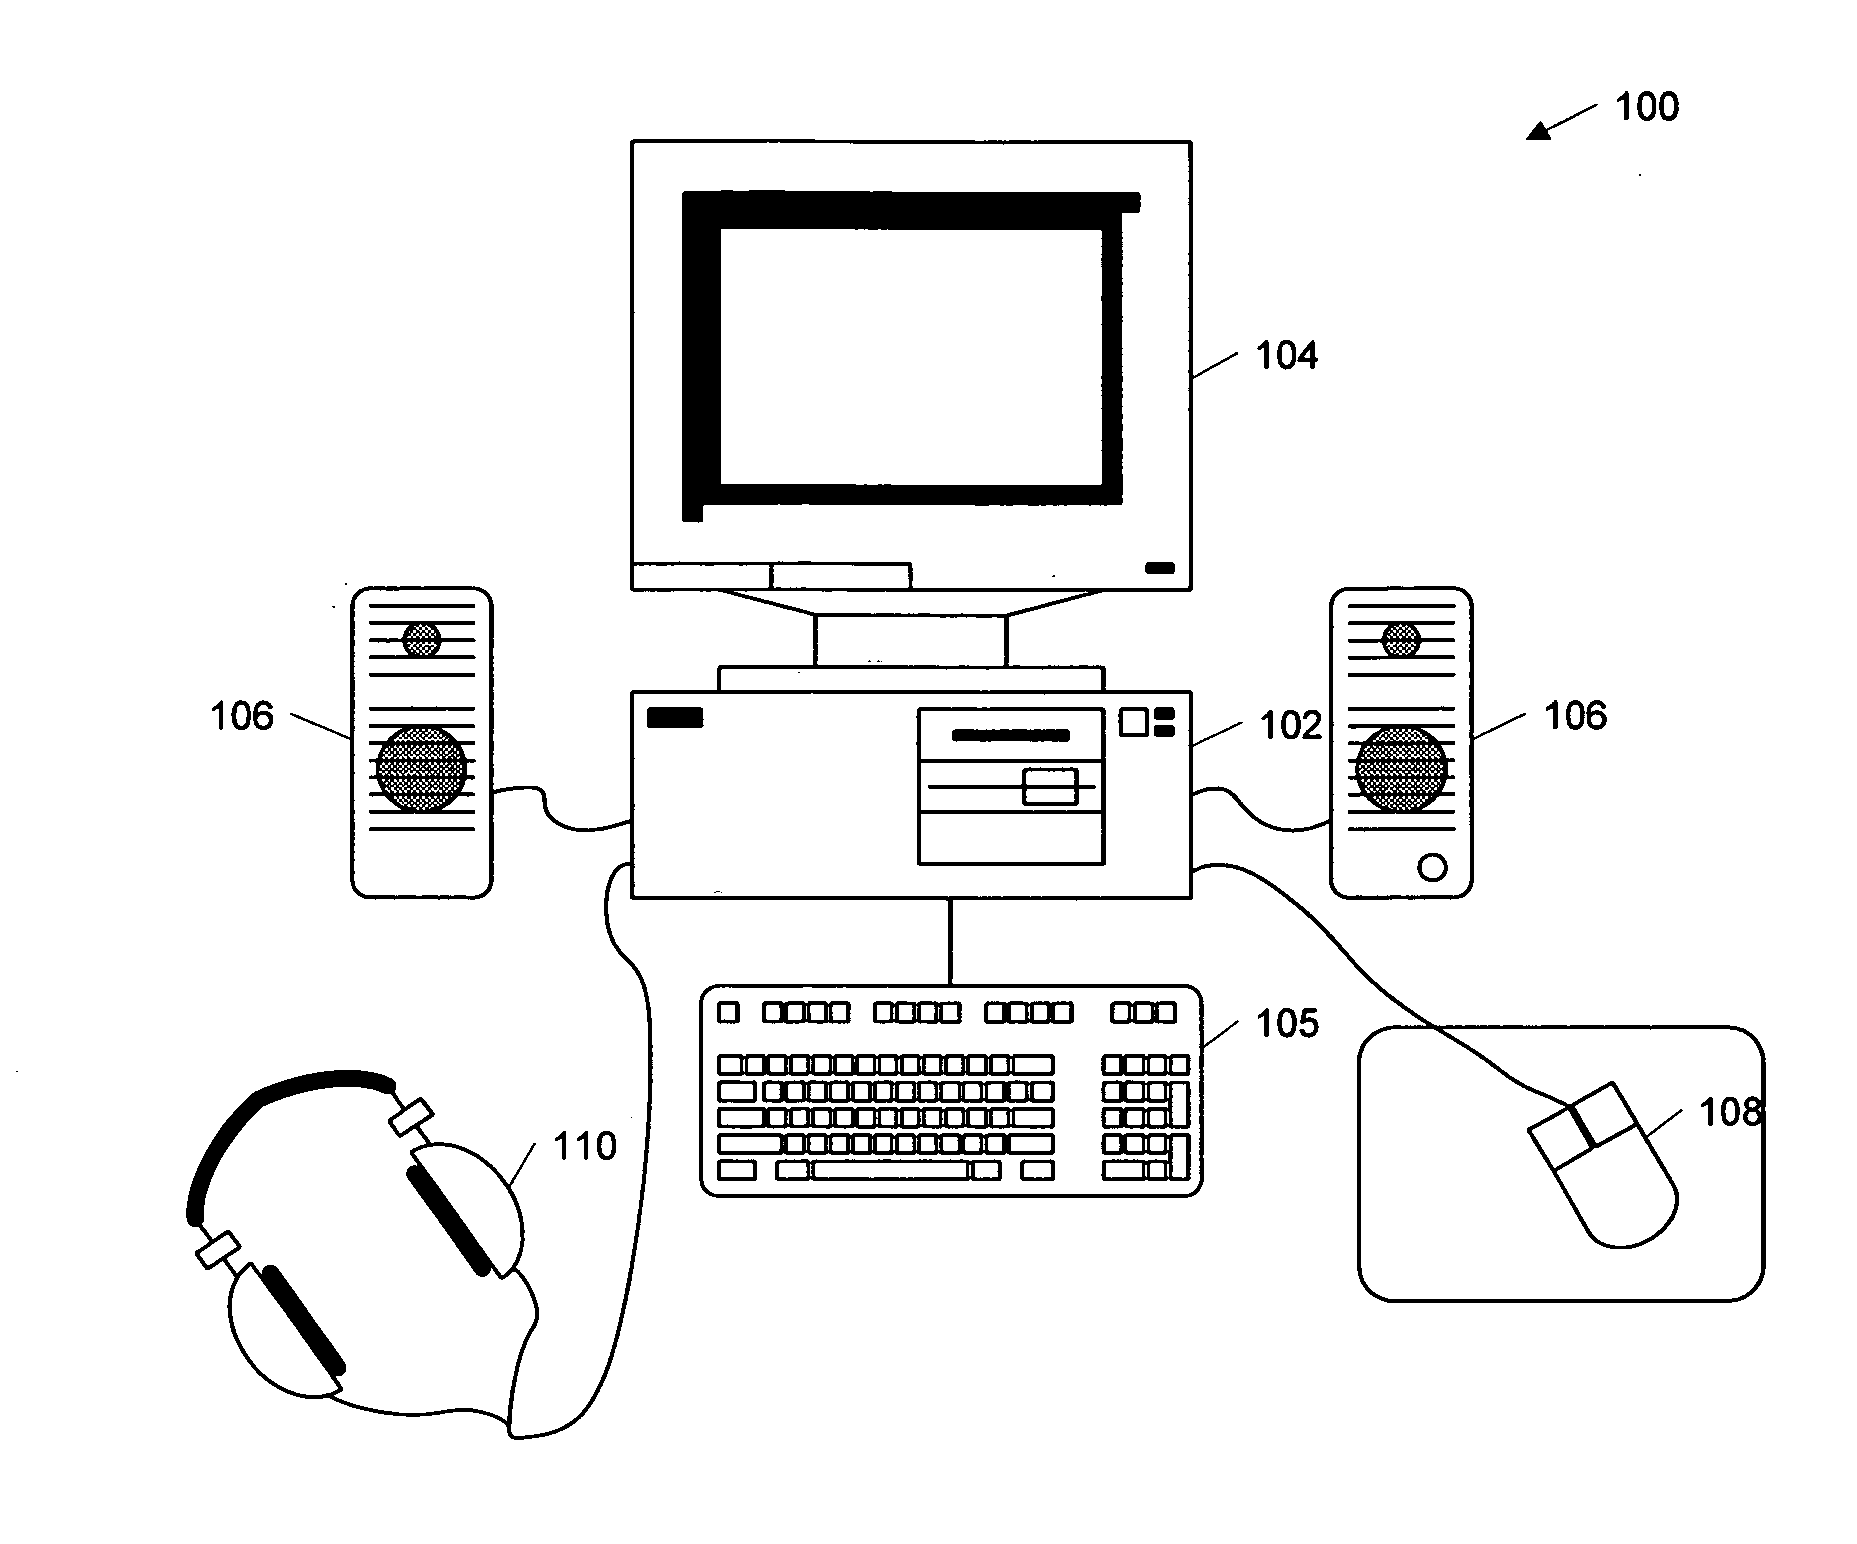 Method and apparatus for automated training of language learning skills